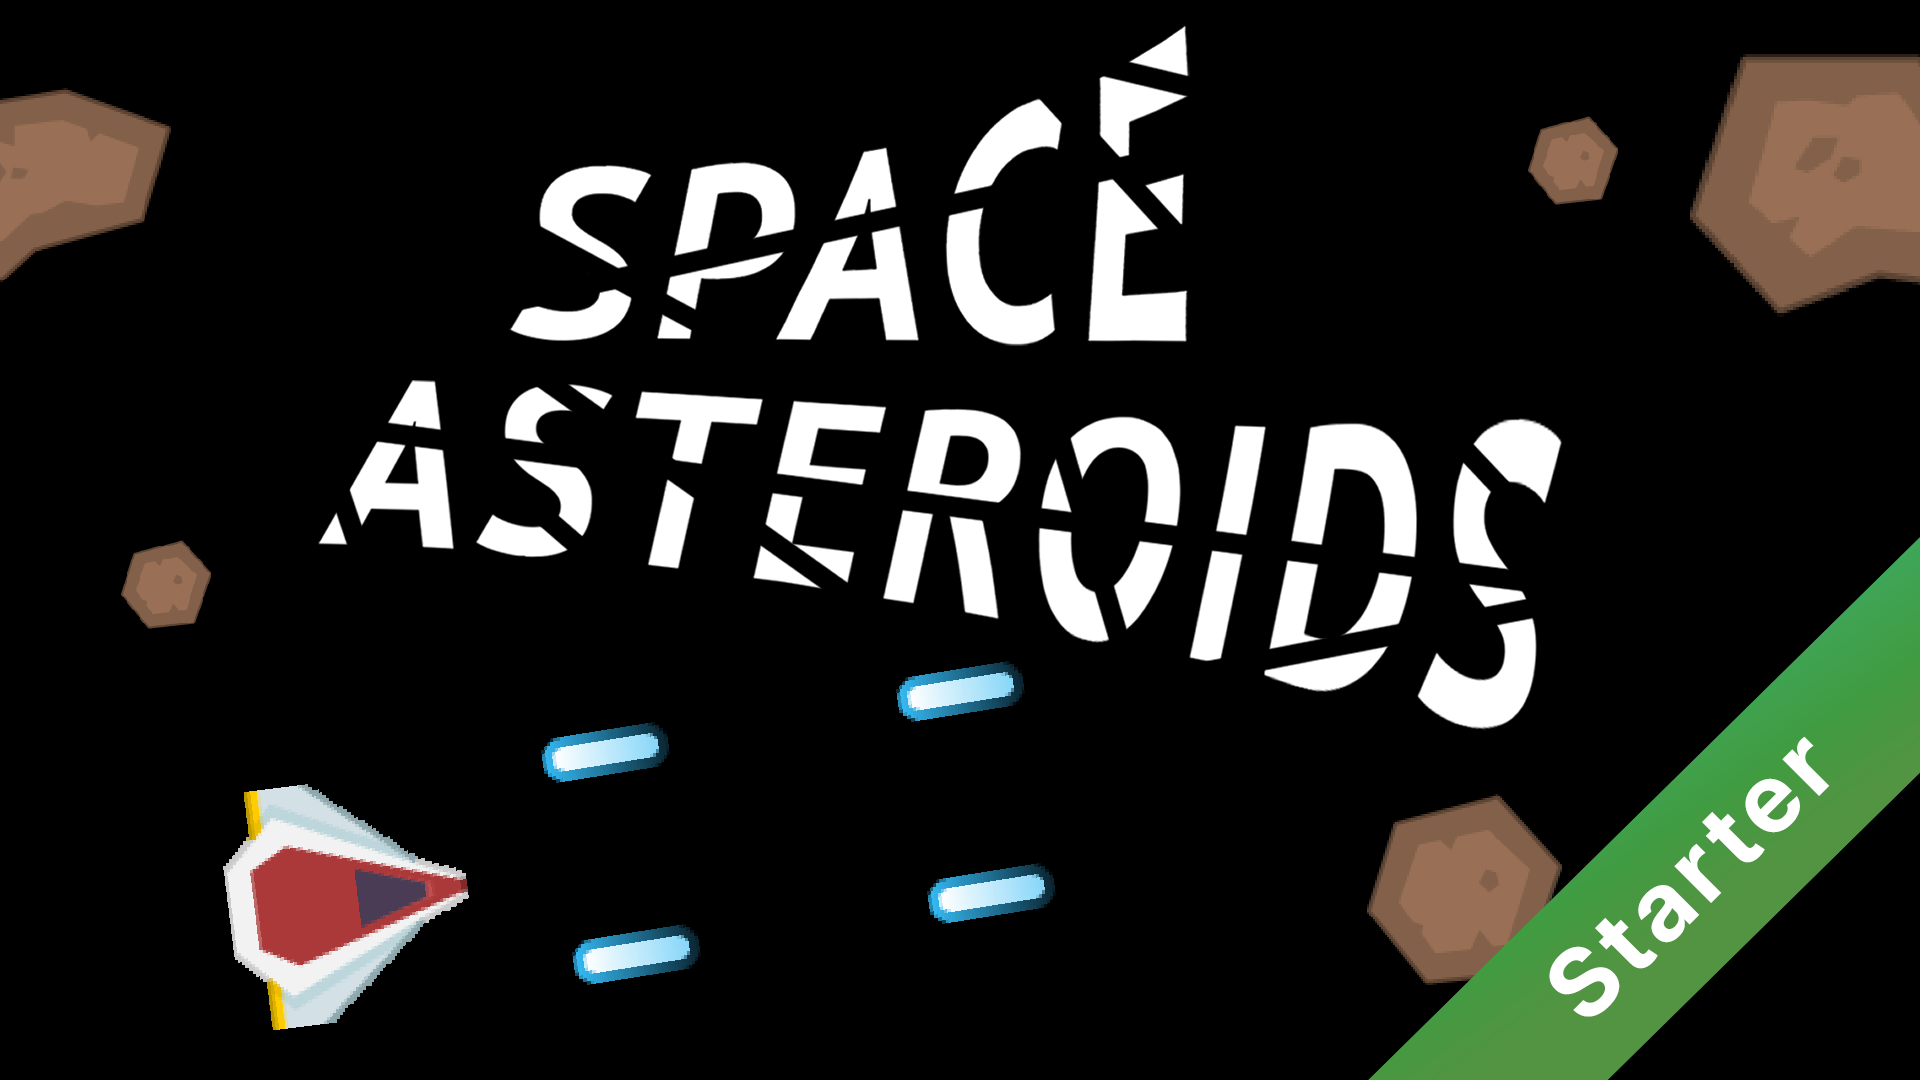 Space asteroids